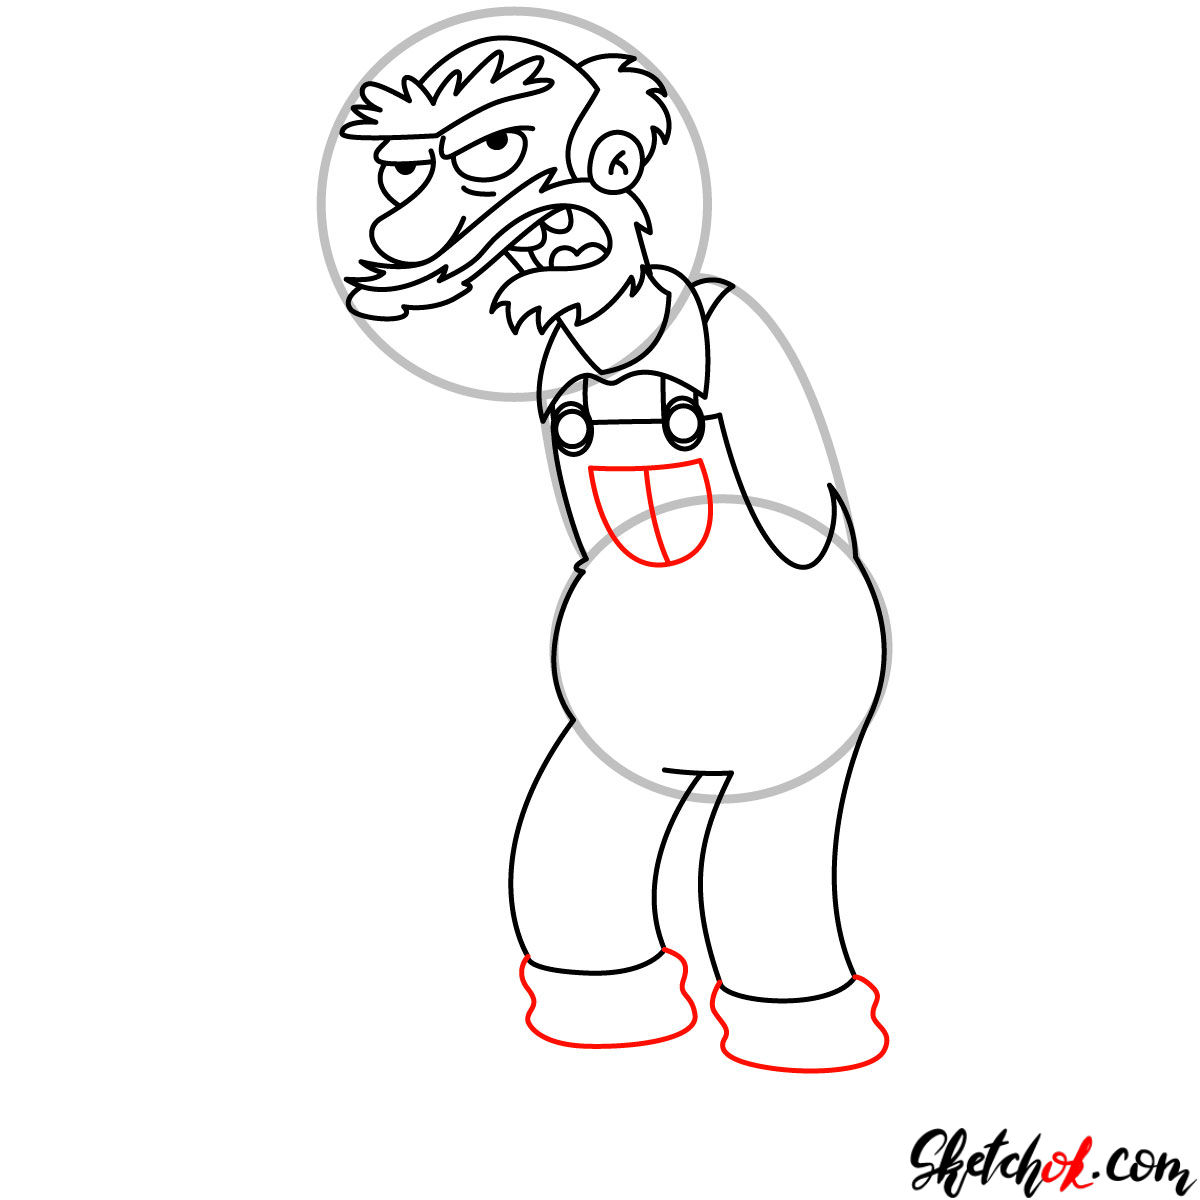 How to draw Groundskeeper Willie with a shovel - step 08